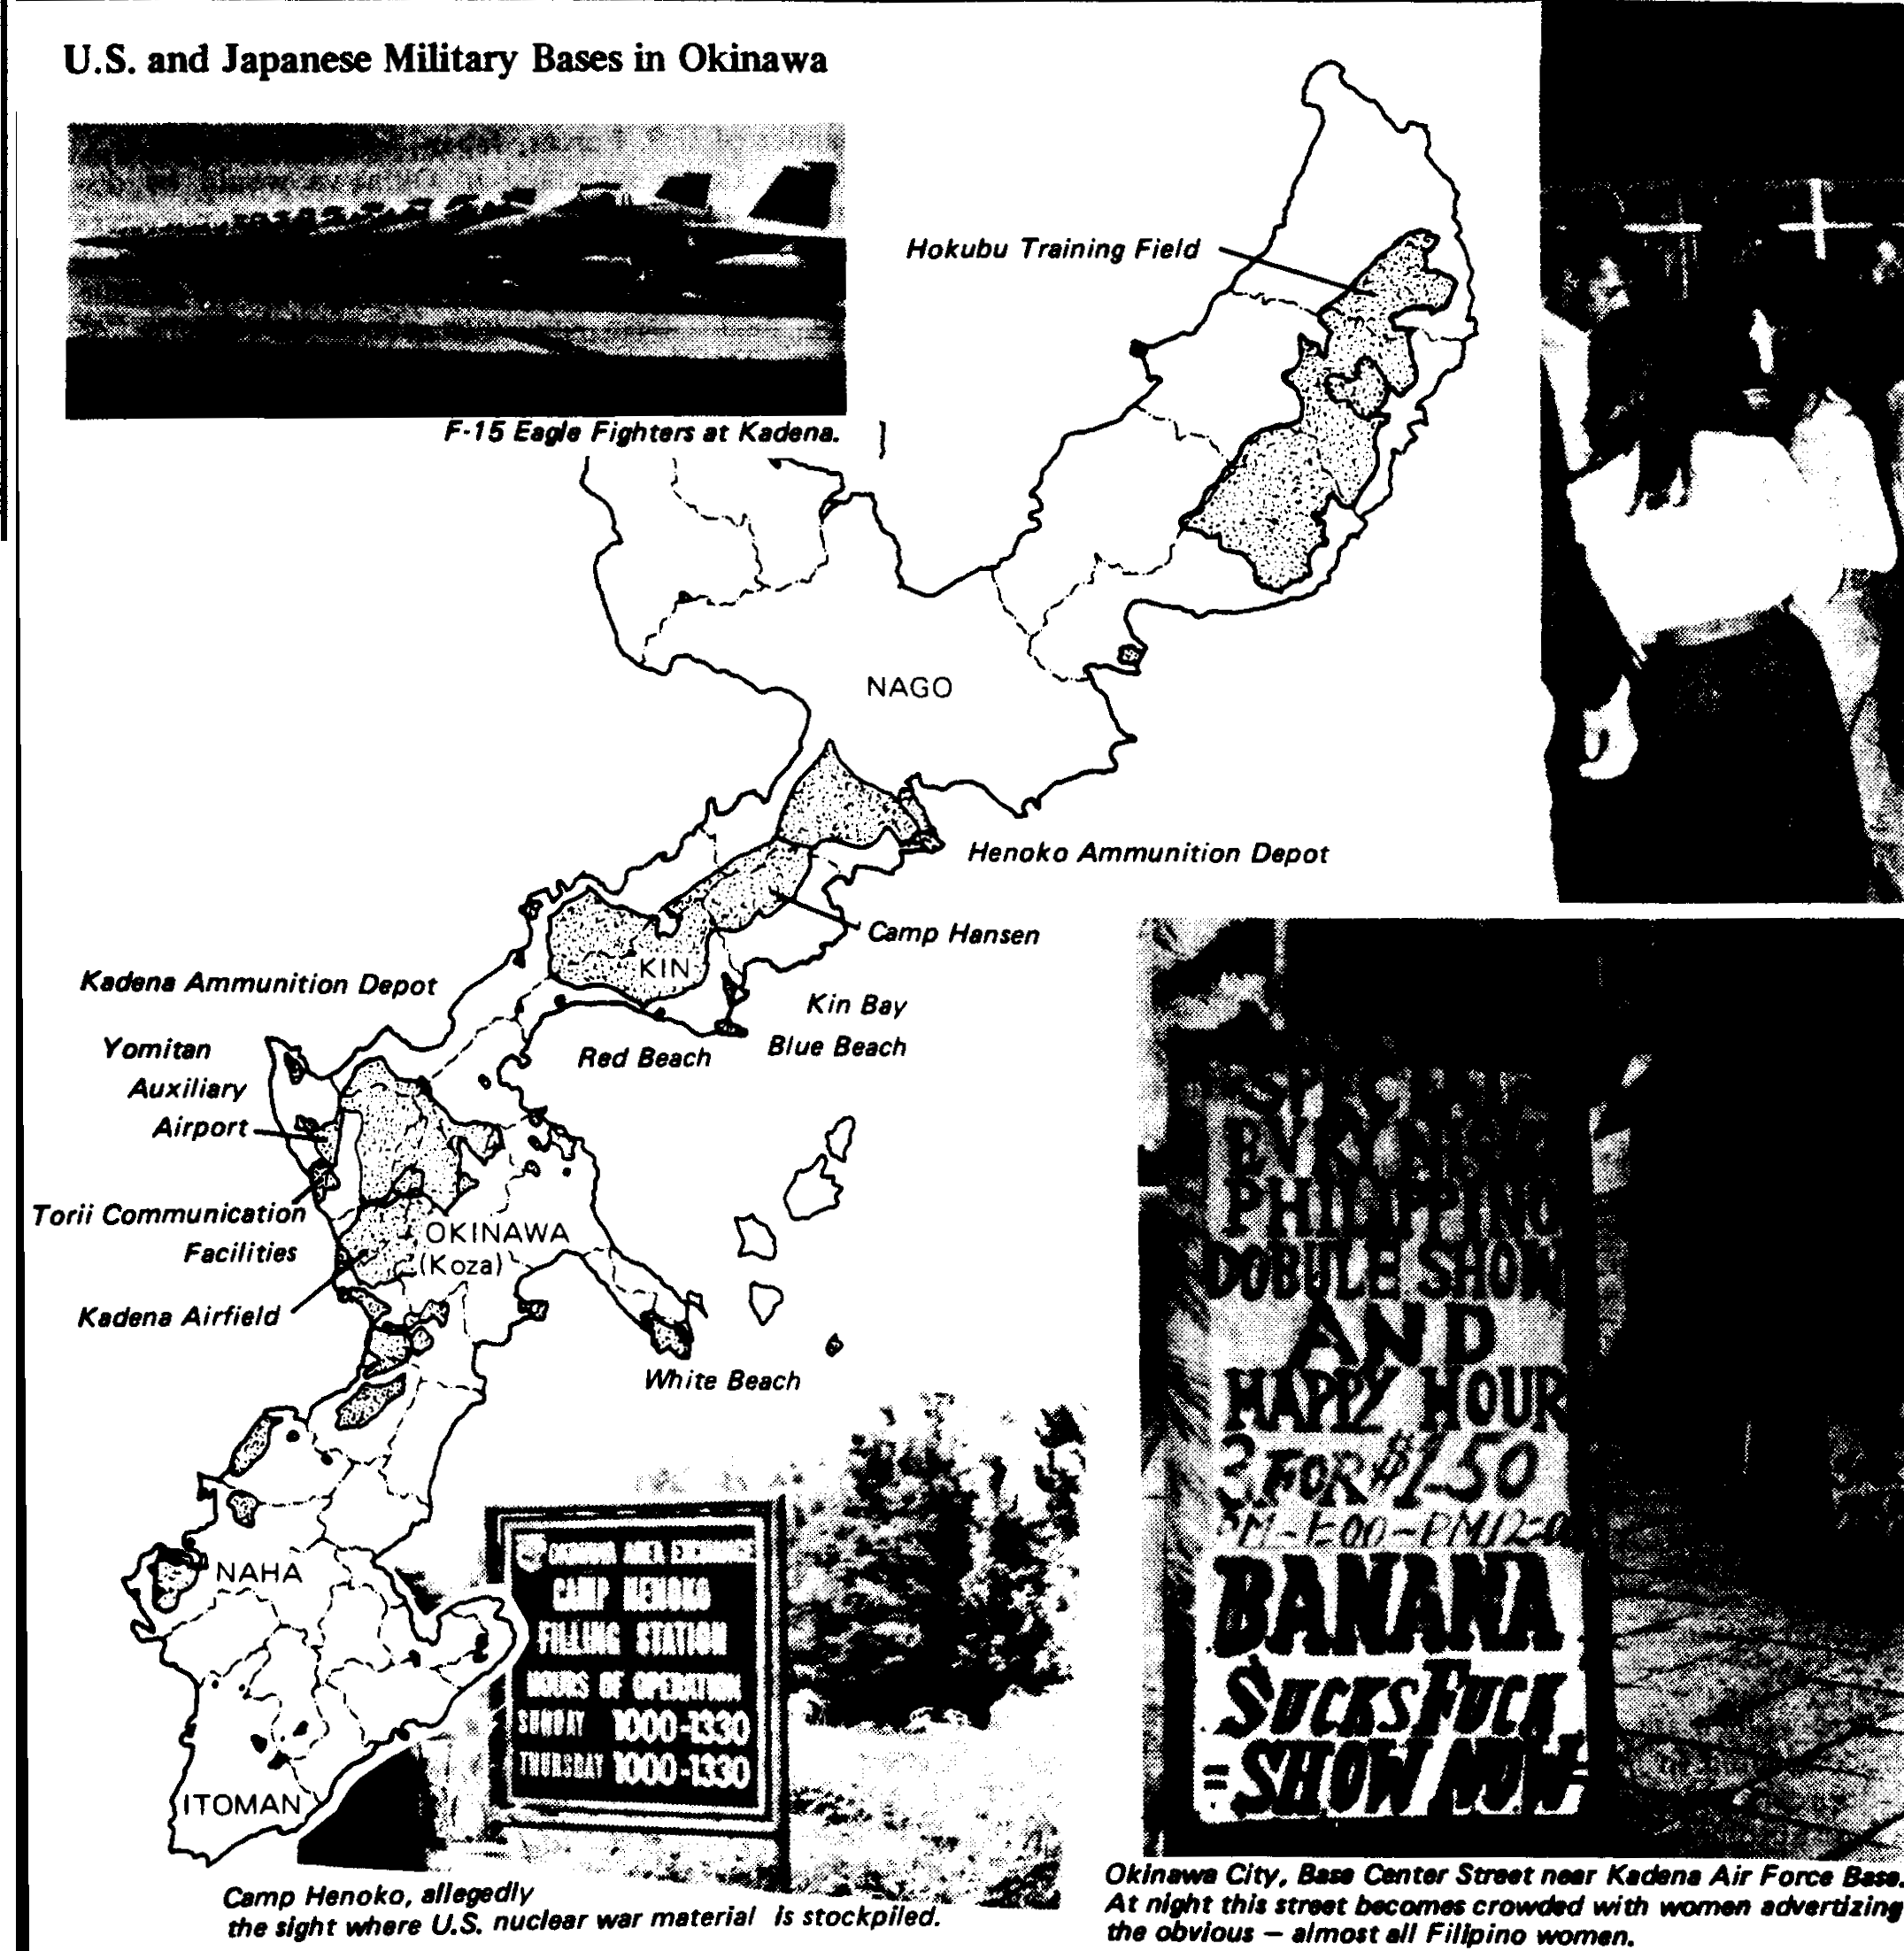 U.S. and Japanese military bases in Okinawa